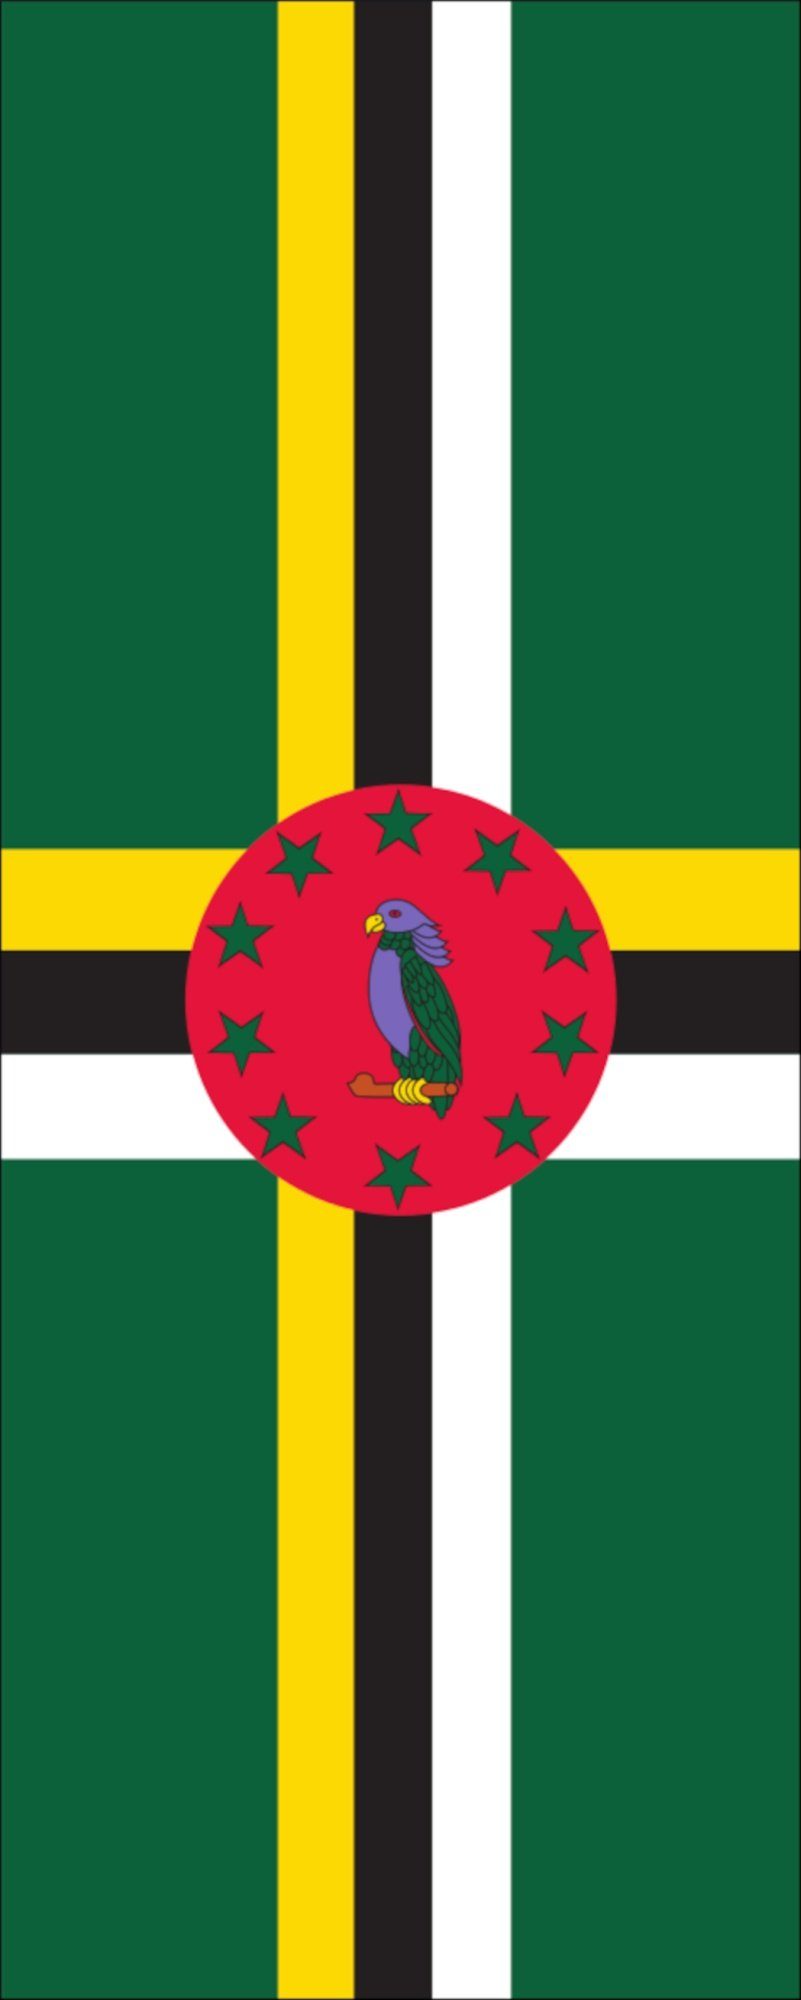 flaggenmeer Dominica Flagge 110 Flagge g/m² Hochformat